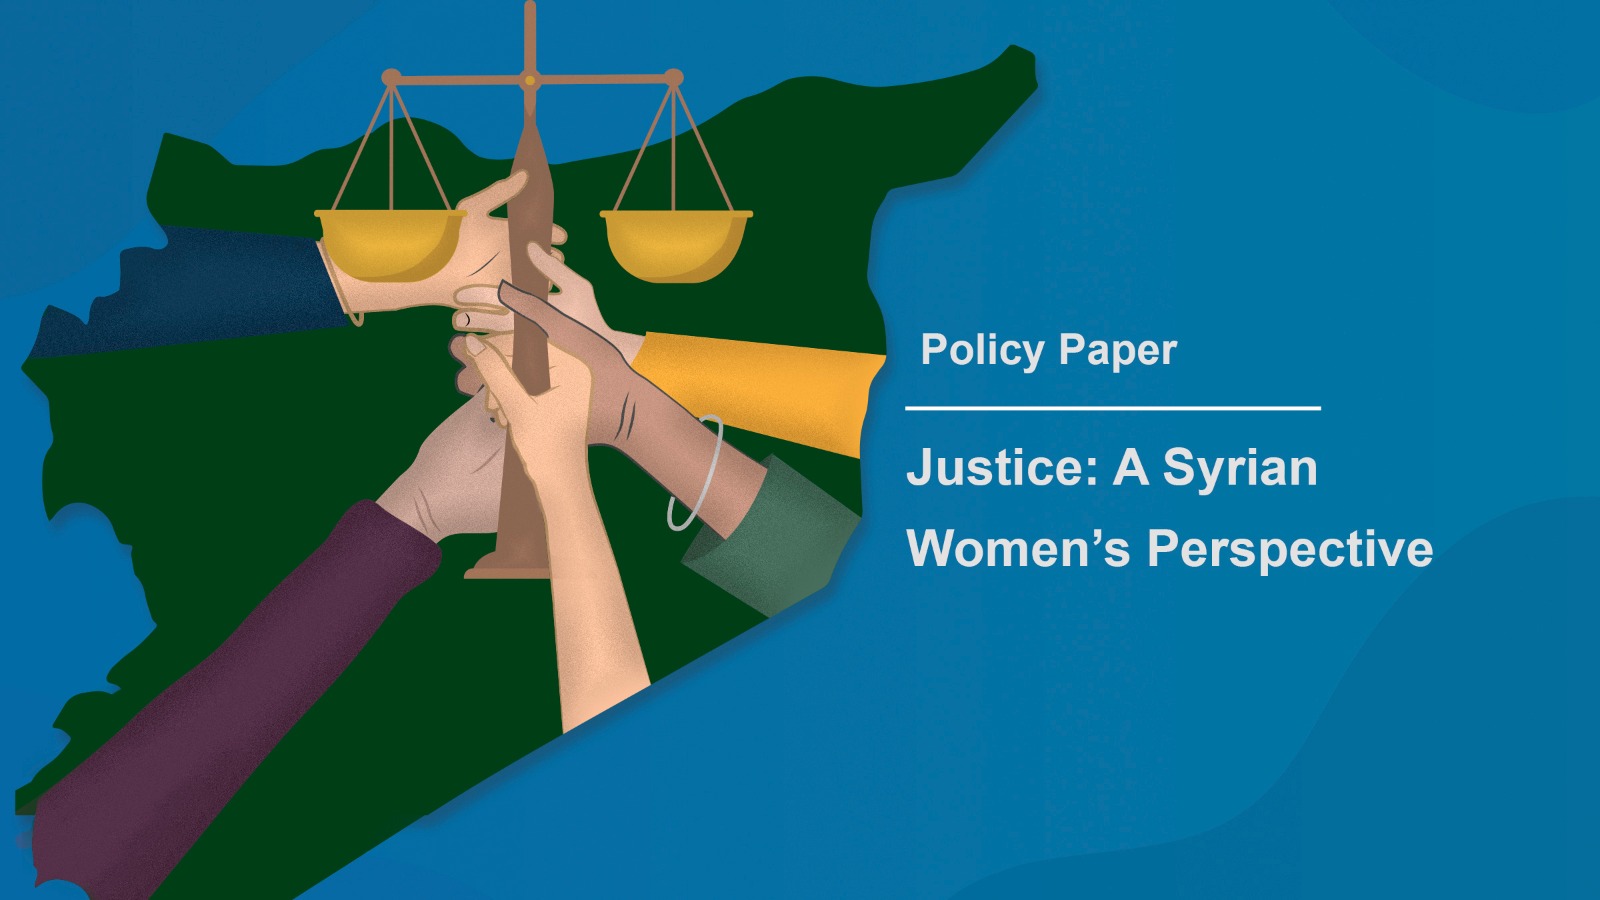 Policy Paper- Justice: A Syrian Women’s Perspective